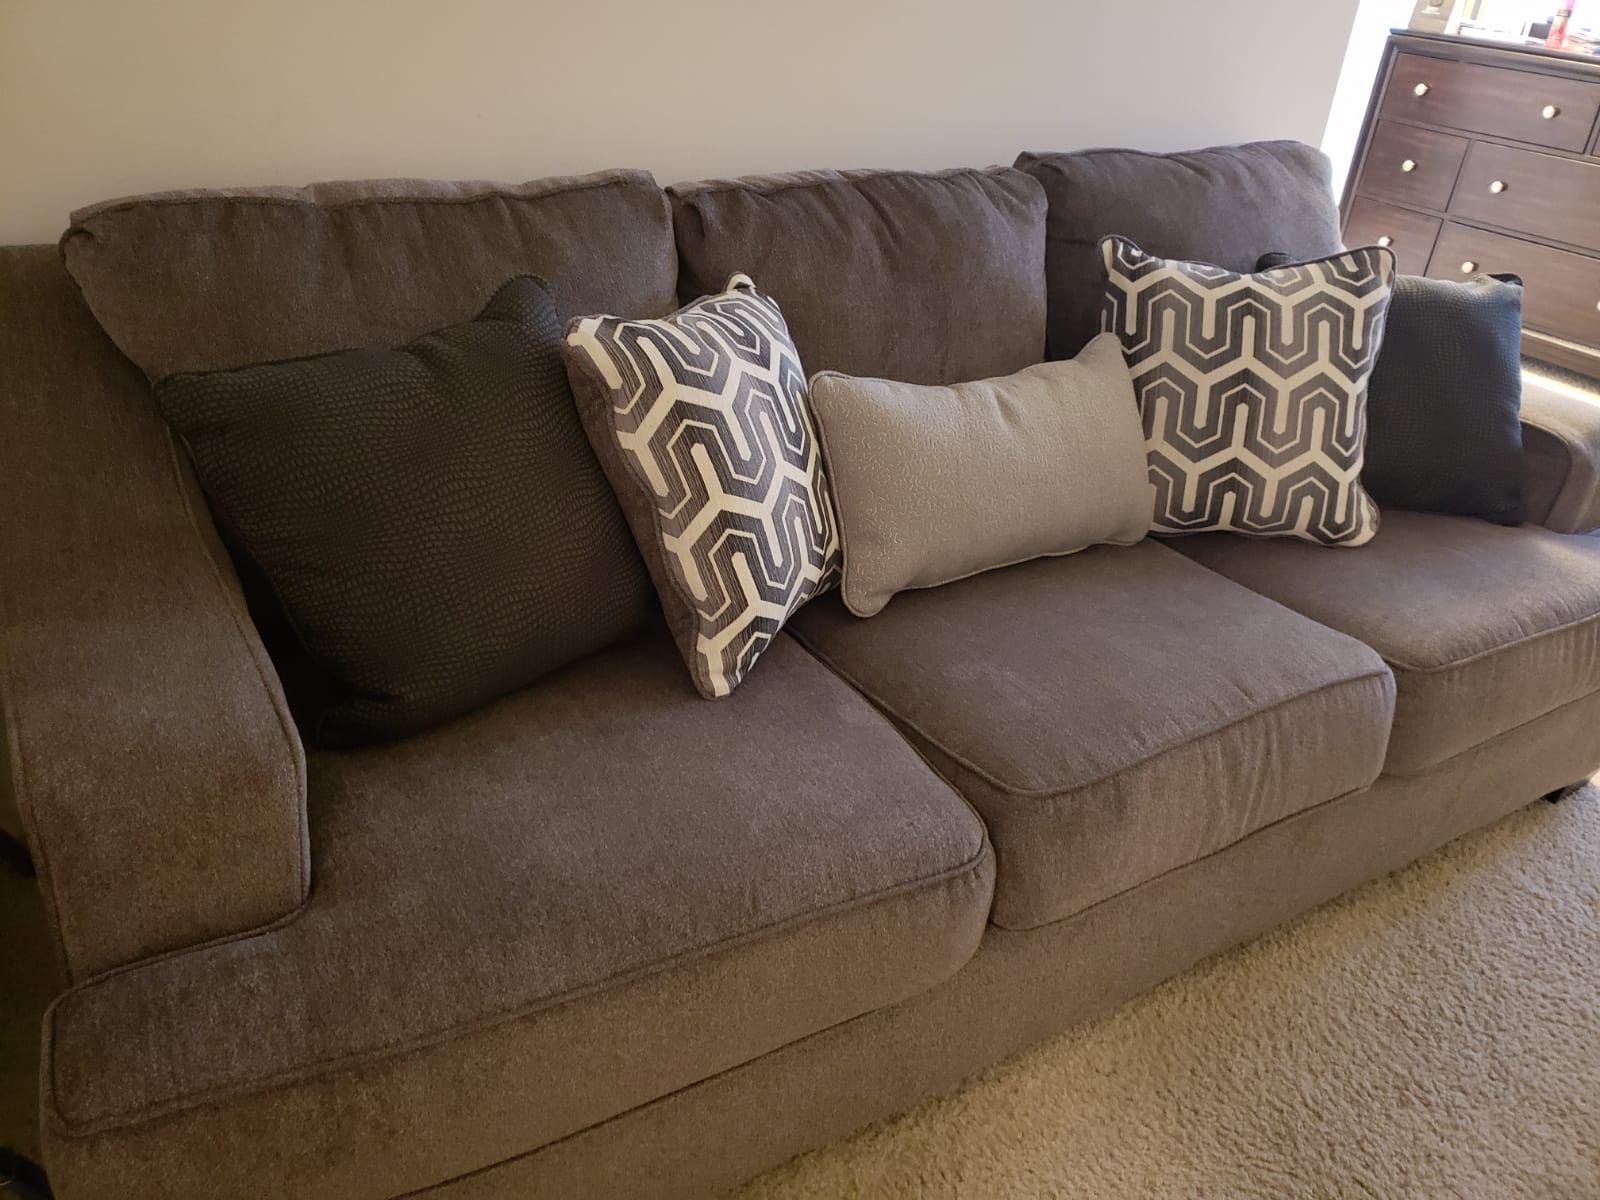 Gray love seat with pillows